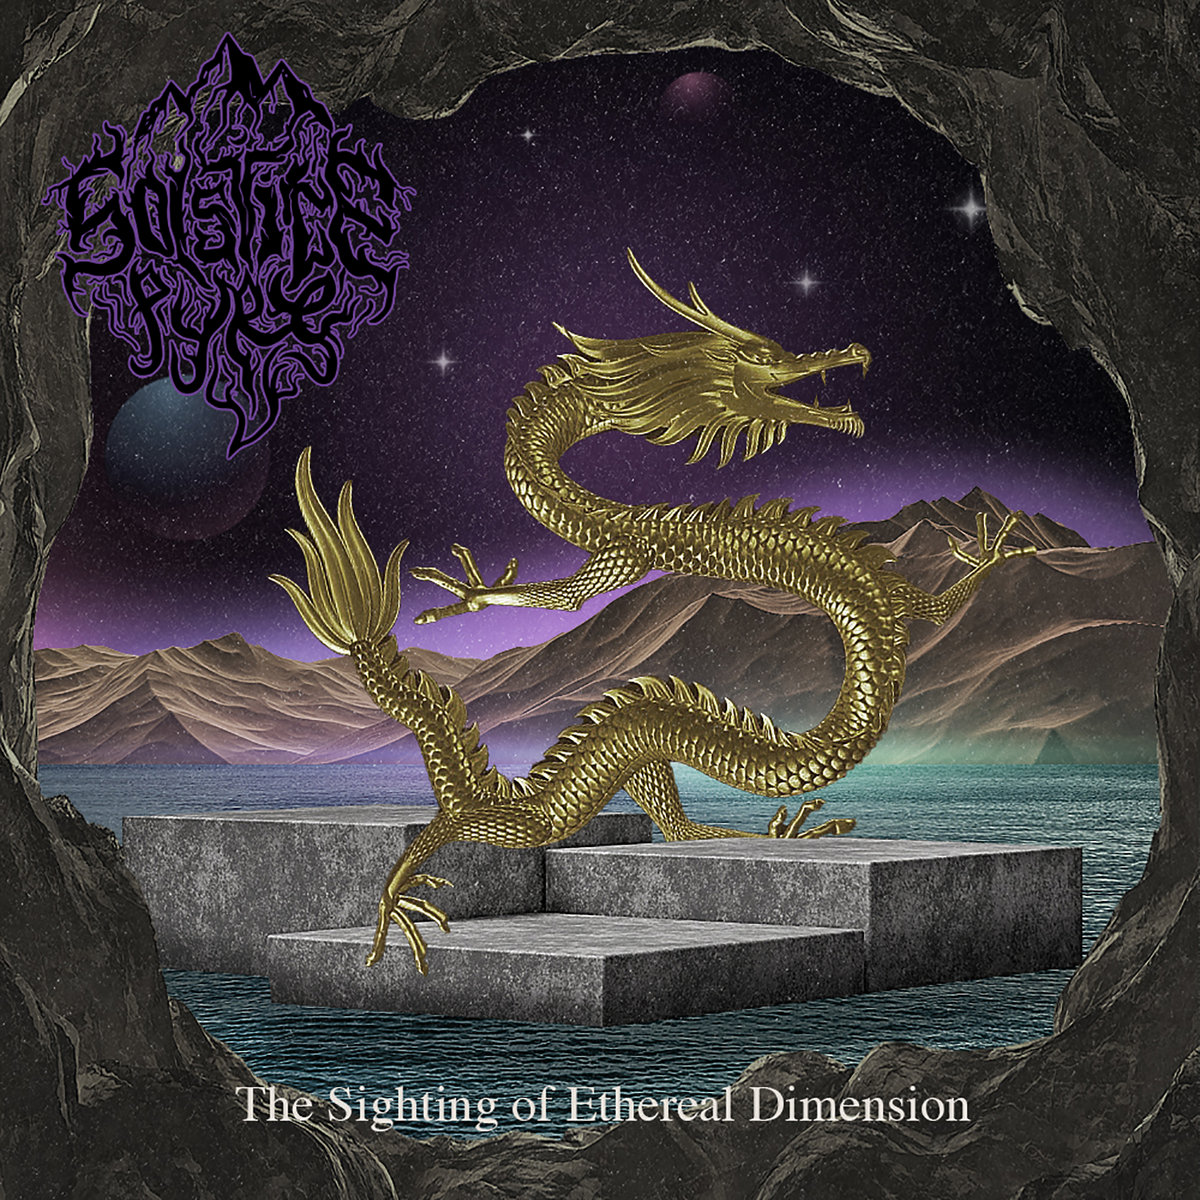 Solstice Pyre - "The Sighting of Ethereal Dimension" EP - 2023